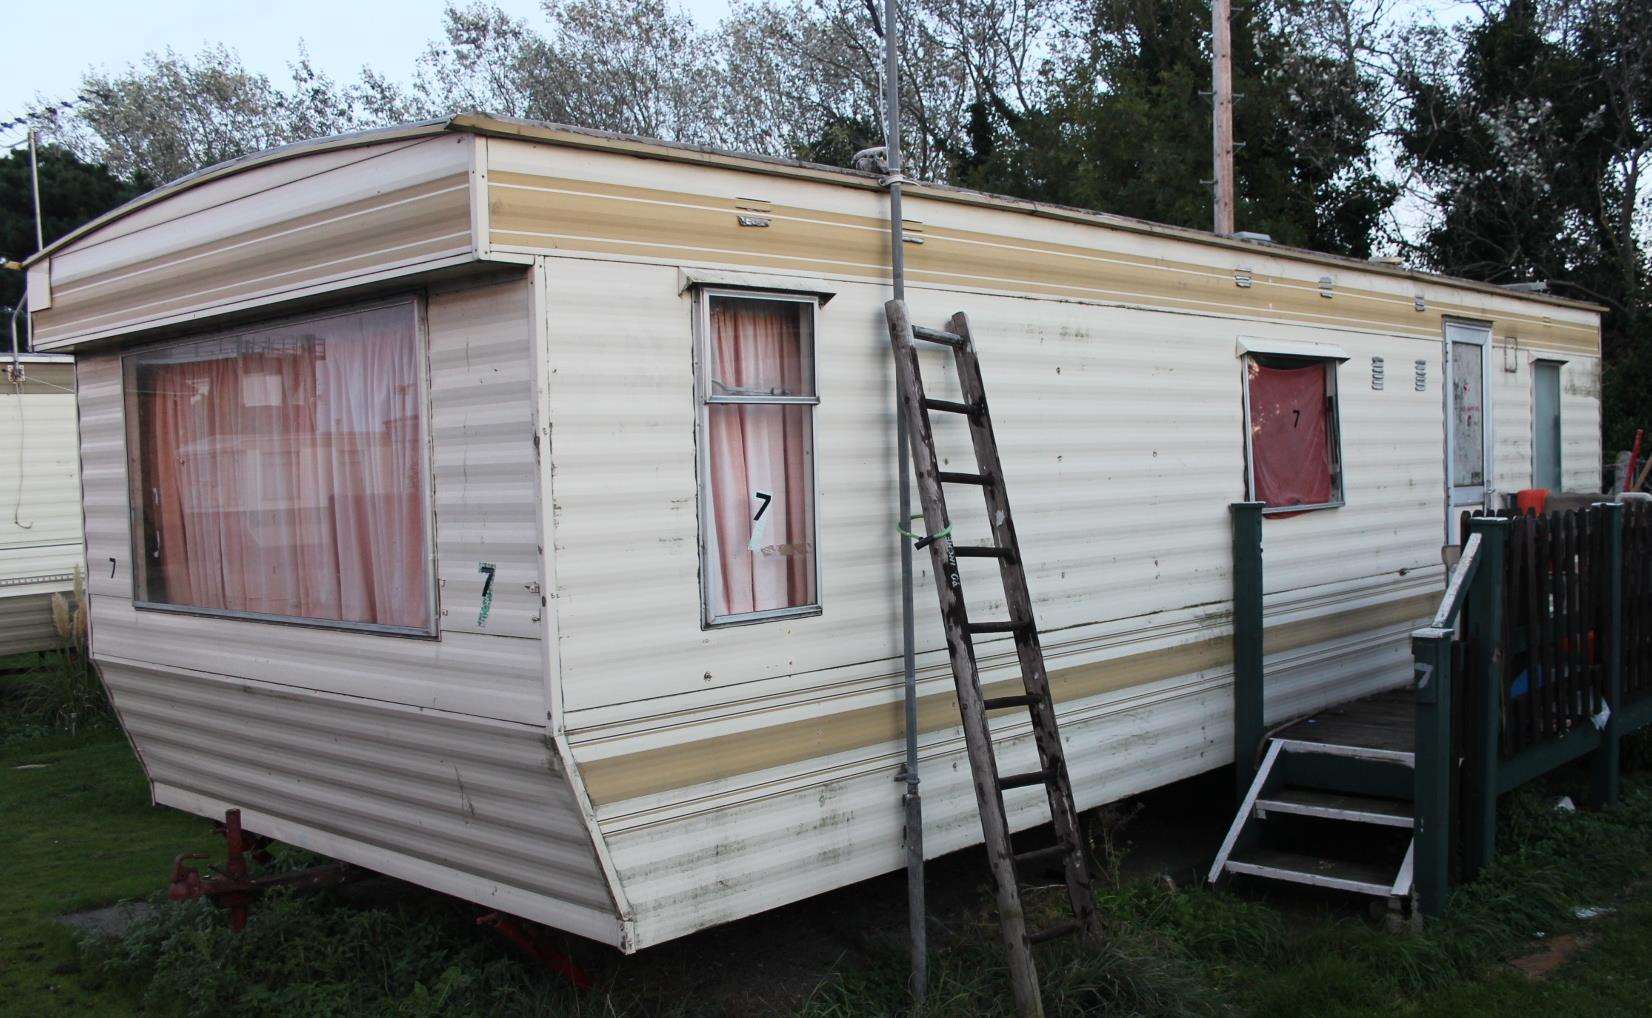 The home at Seabreeze caravan park in Marine Parade, Sheerness, where Anne McManus lived